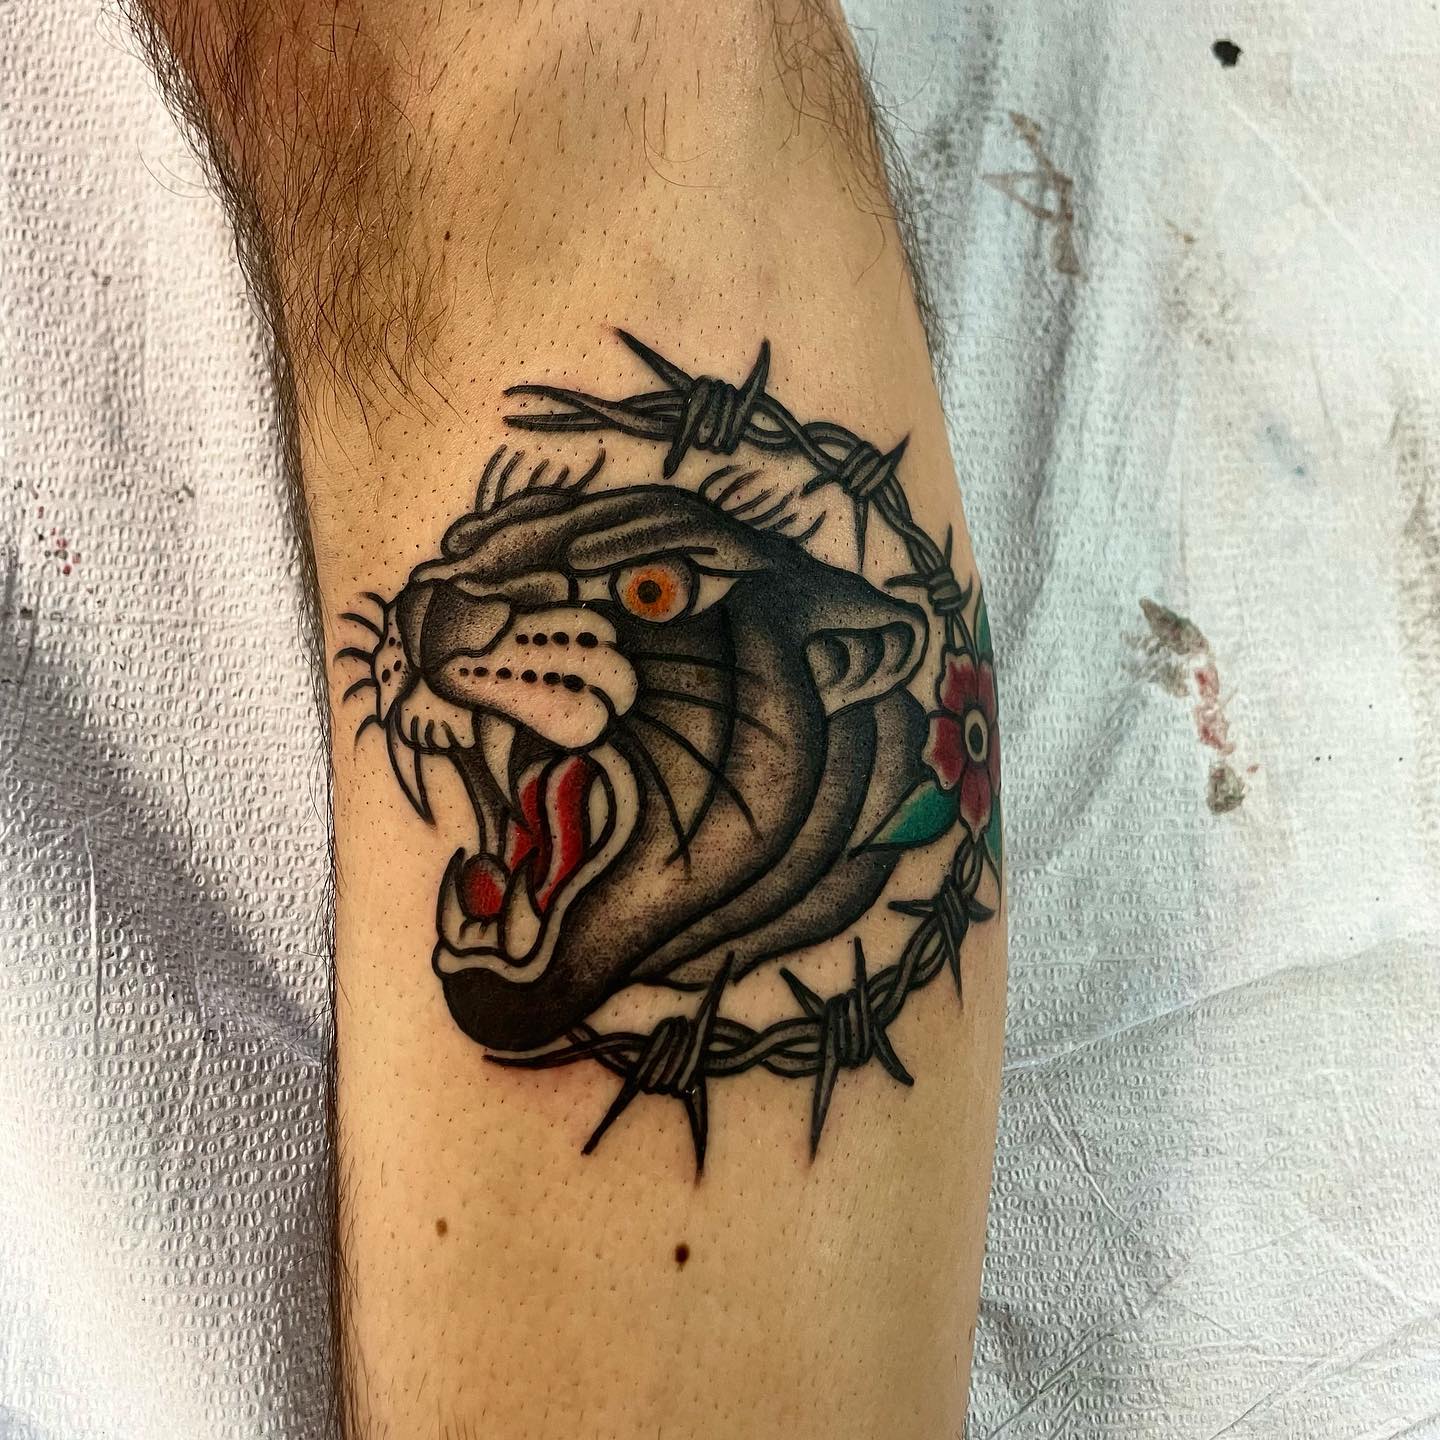 Tigers are super-wild and strong animals. They are mostly chosen as a tattoo since they offer a wild and tough look. In this tattoo, a roaring tiger is combined with a barbed wire and this is all you need to show your wild side with its protection.